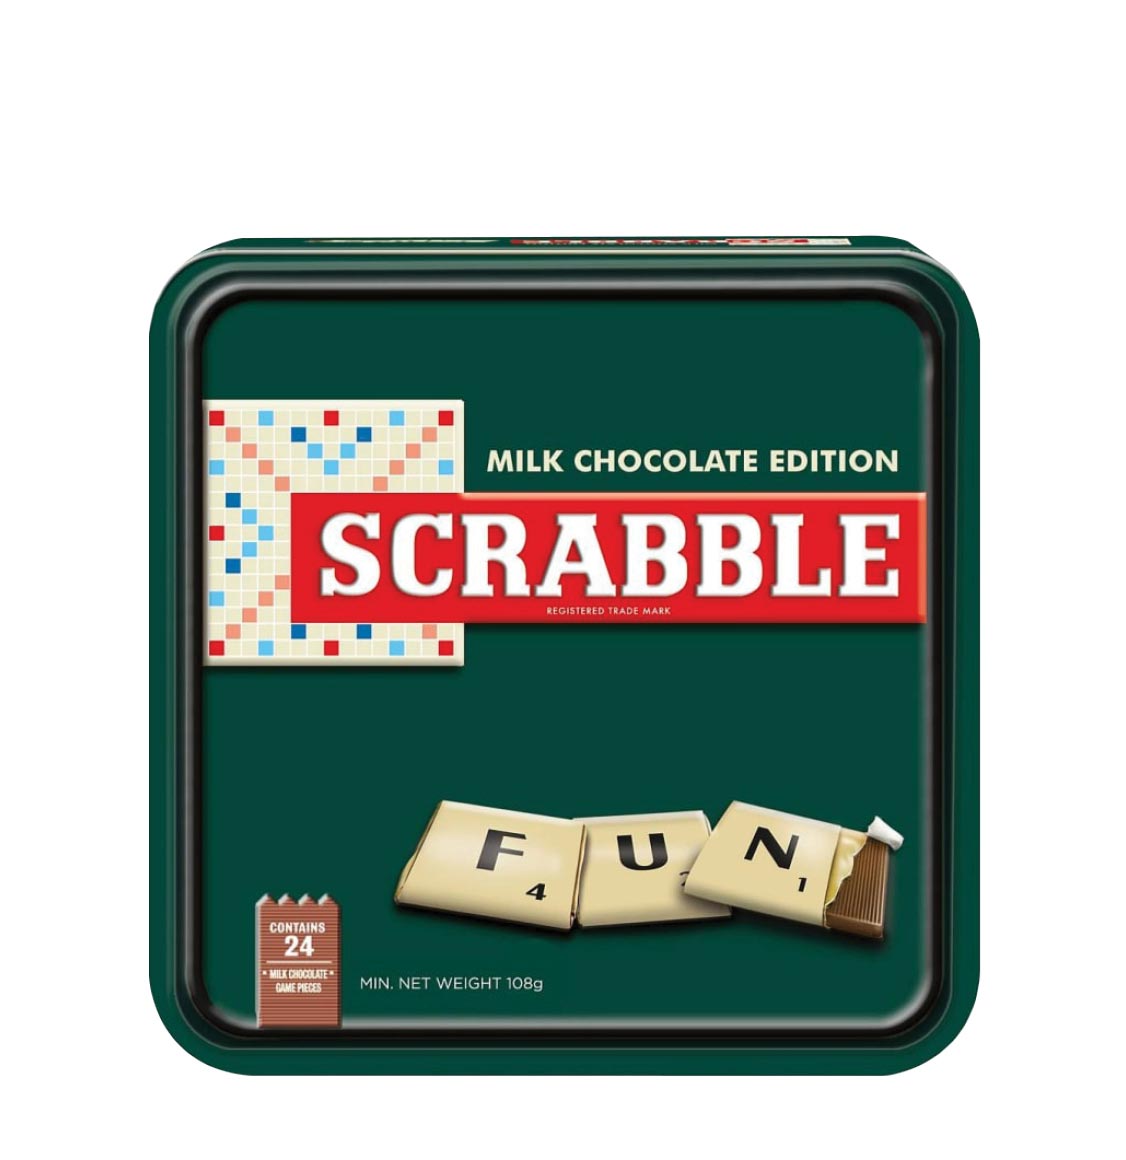 Scrabble Belgian Milk Chocolate Game In Luxury Tin Can Edition 108g